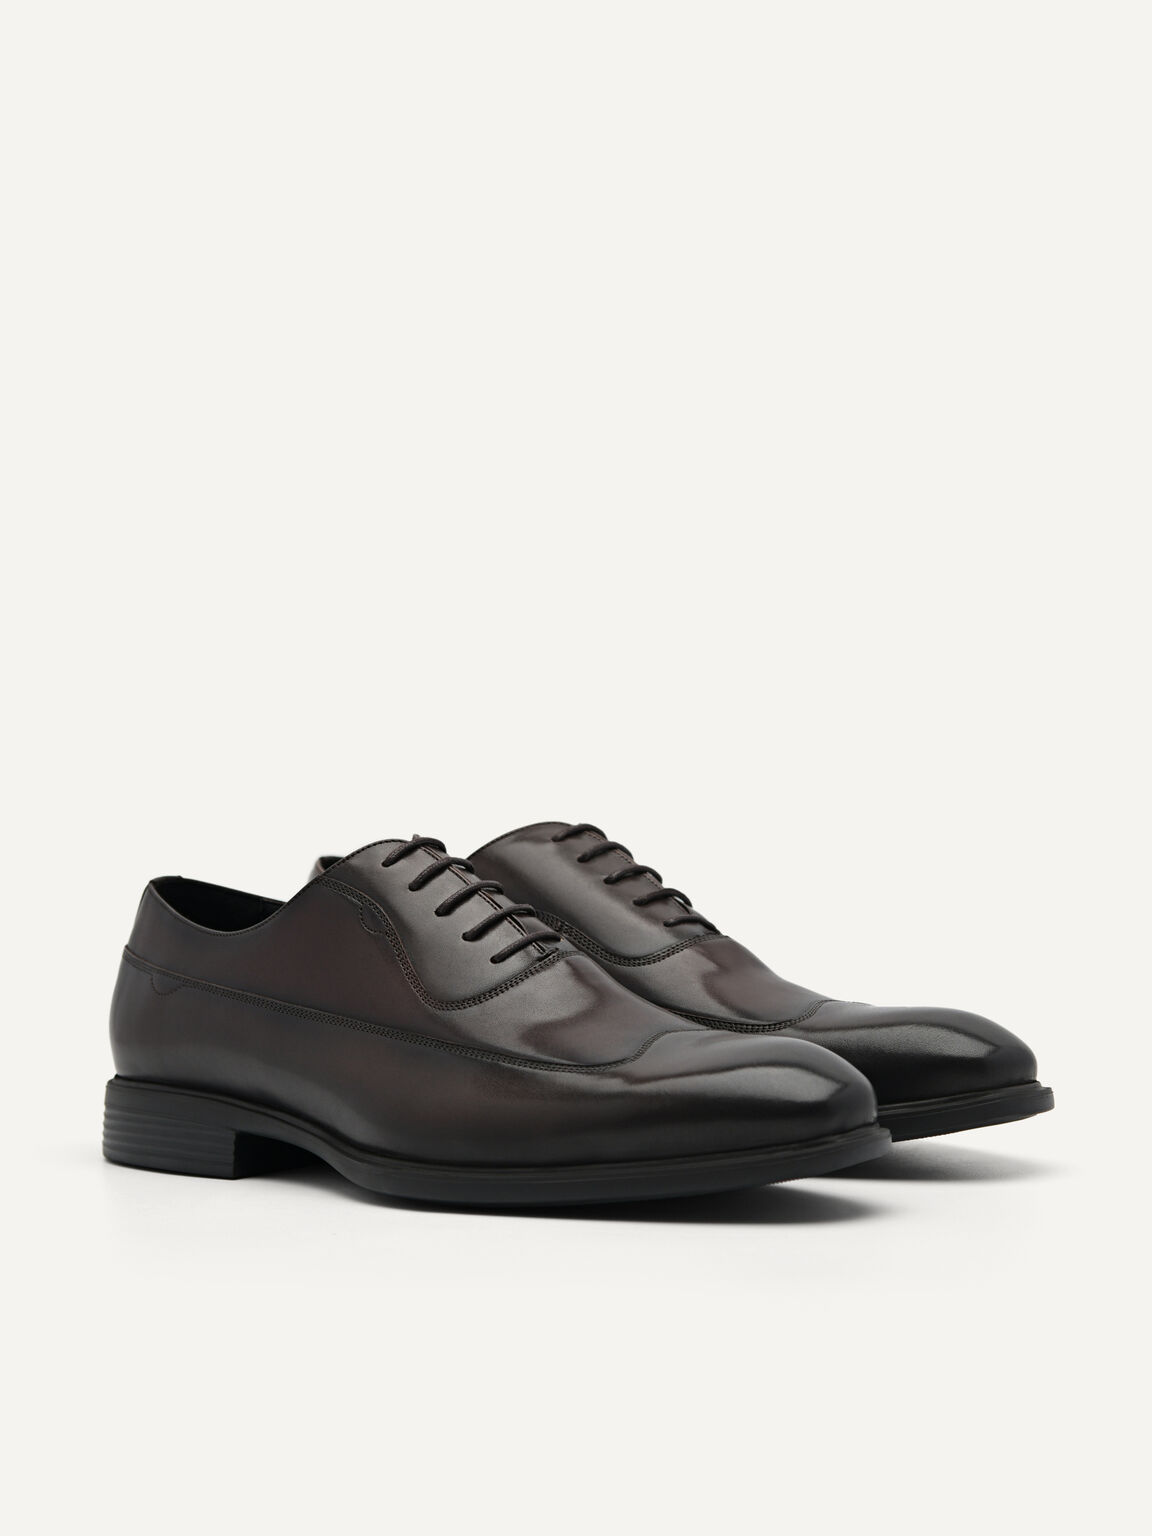 Dylan Leather Oxford Shoes, Dark Brown